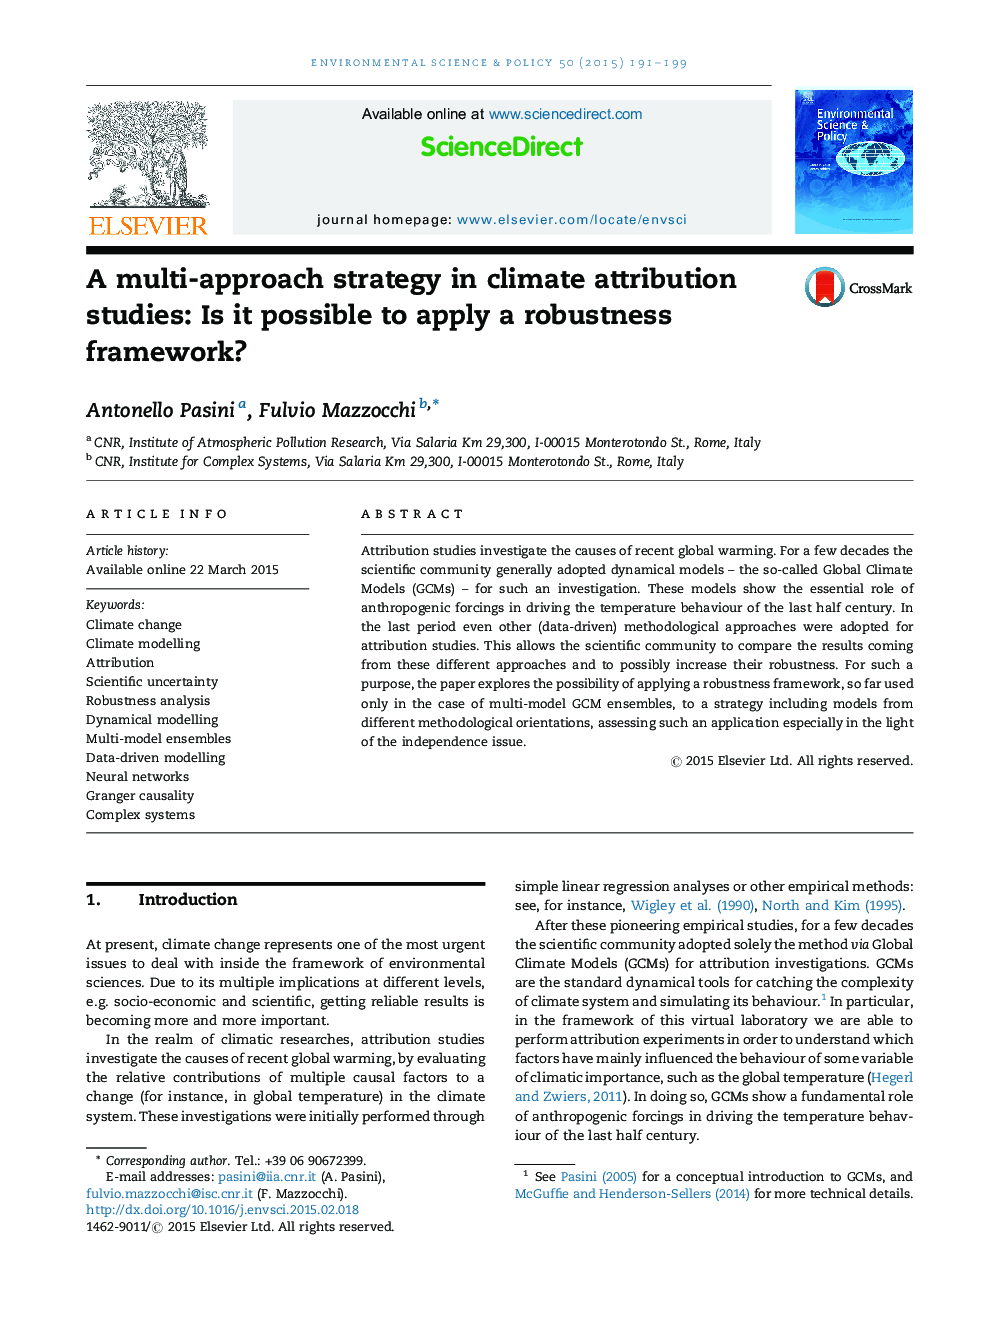 A multi-approach strategy in climate attribution studies: Is it possible to apply a robustness framework?